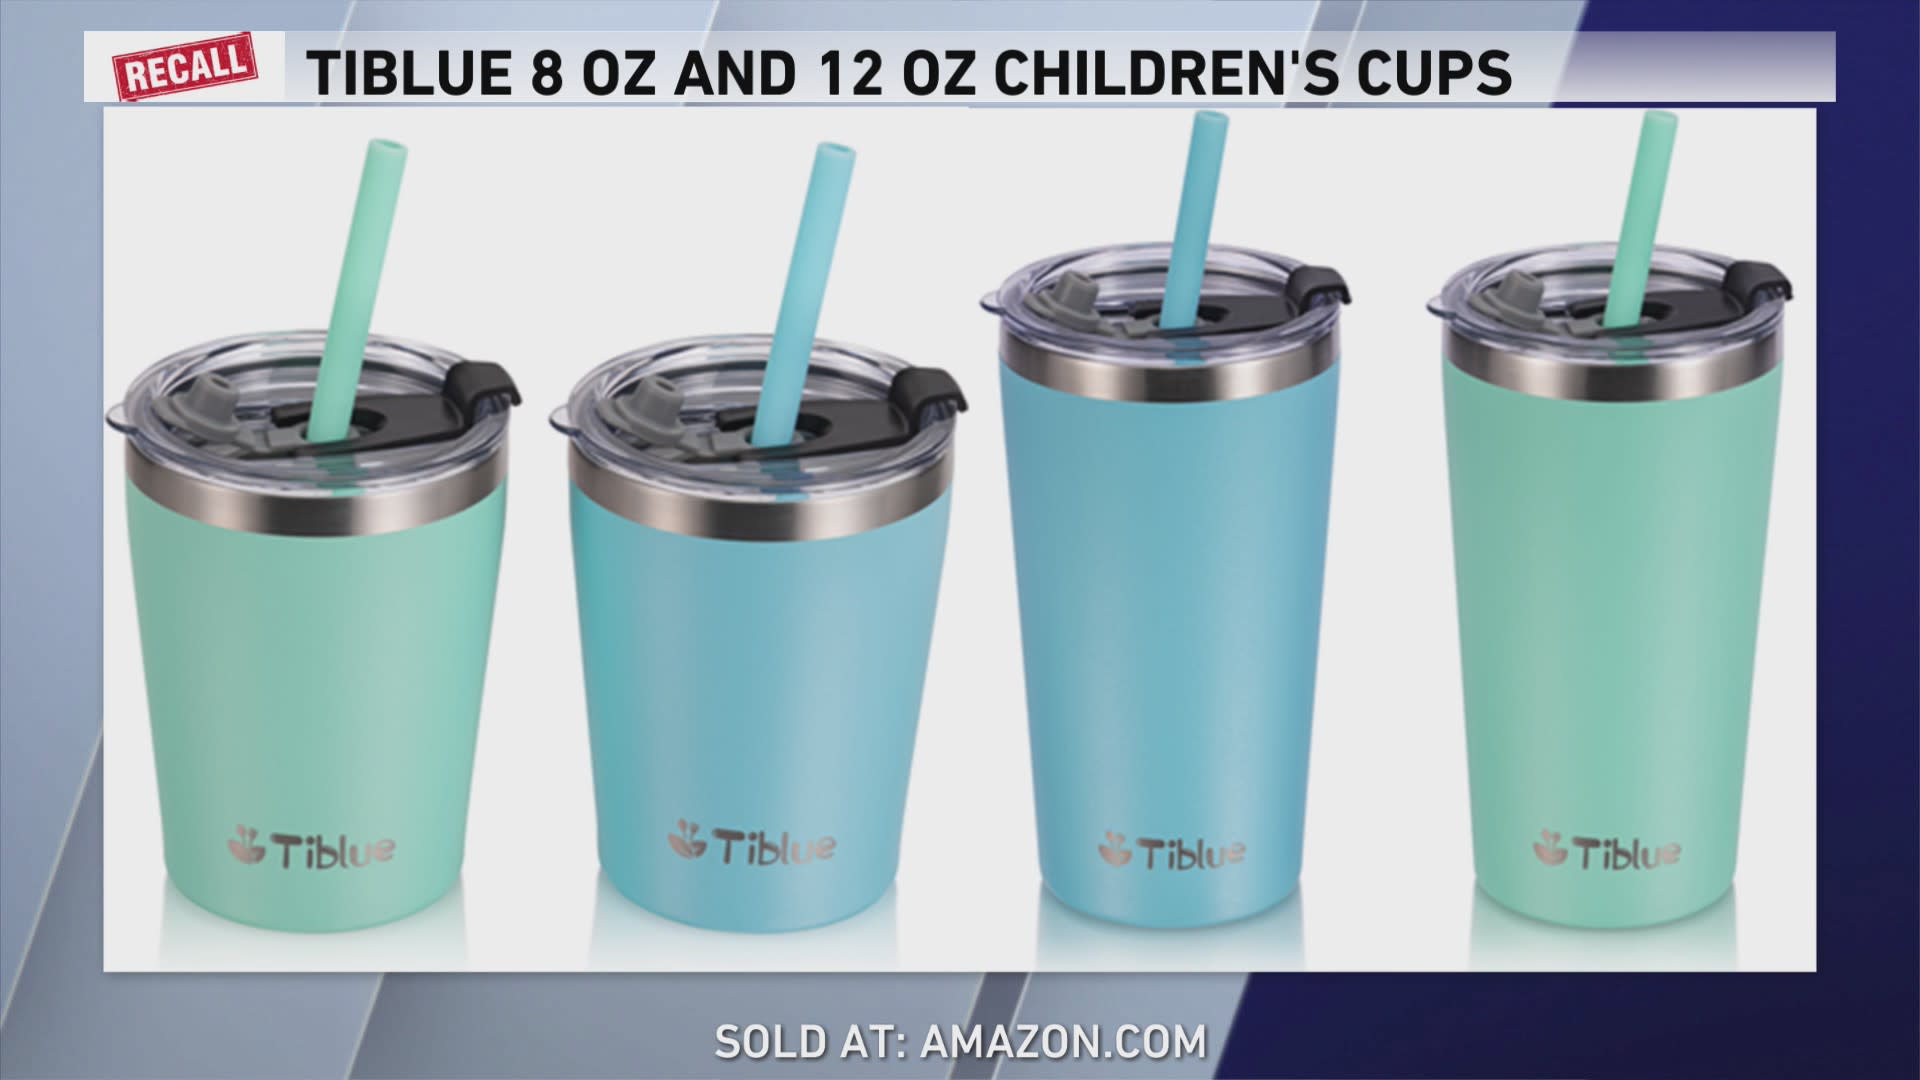 Recall issued for children's cups sold on